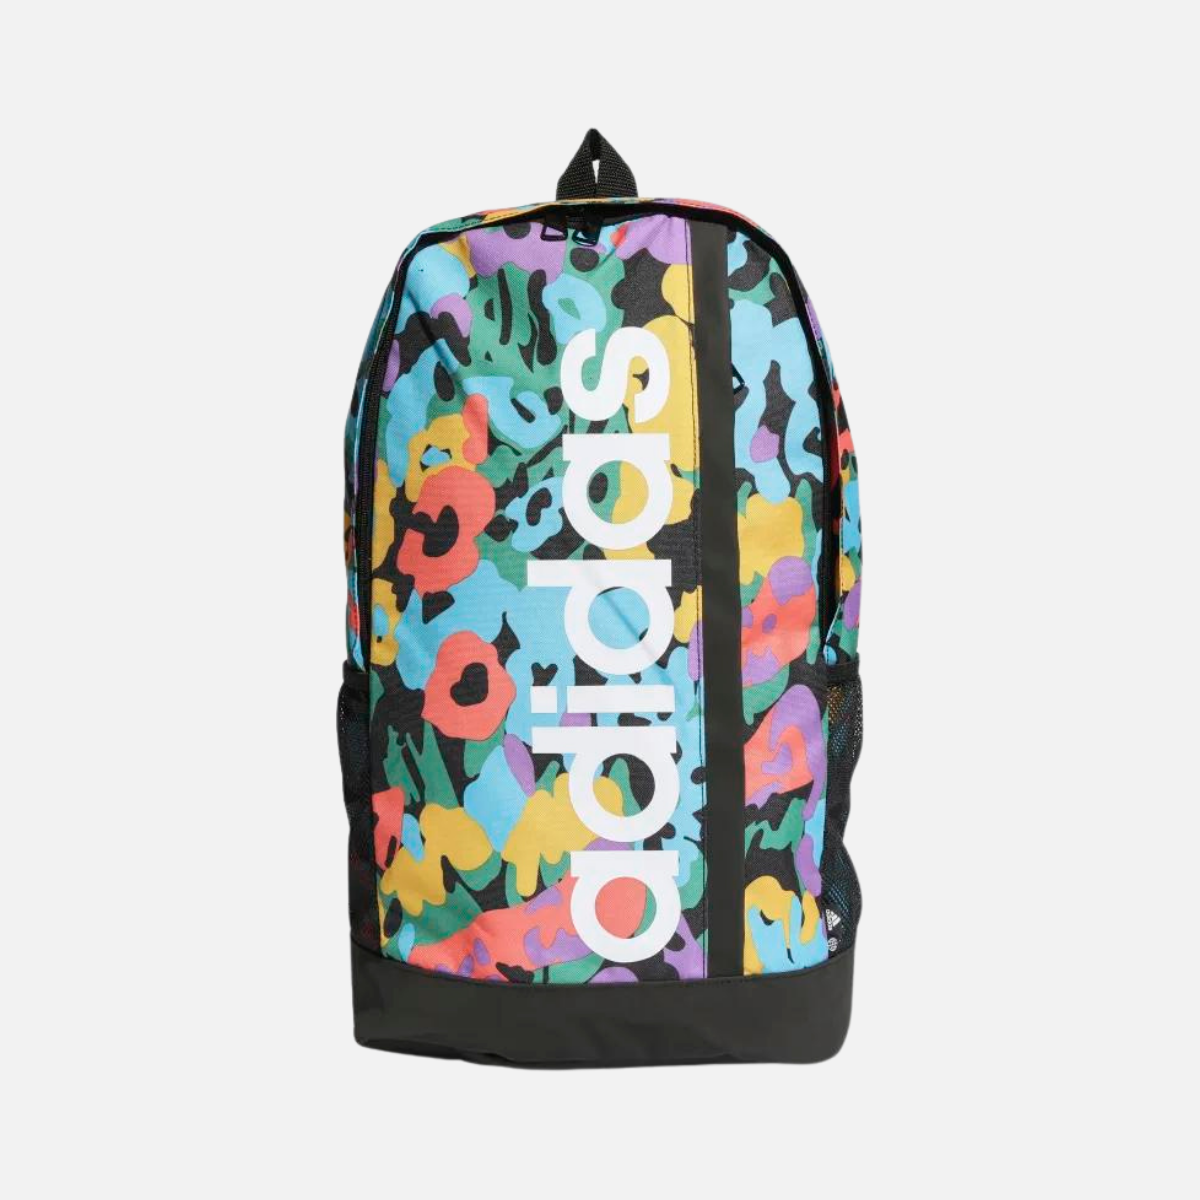 Adidas Brand with the 3 Strips Backpack -Multicolor / Black / White